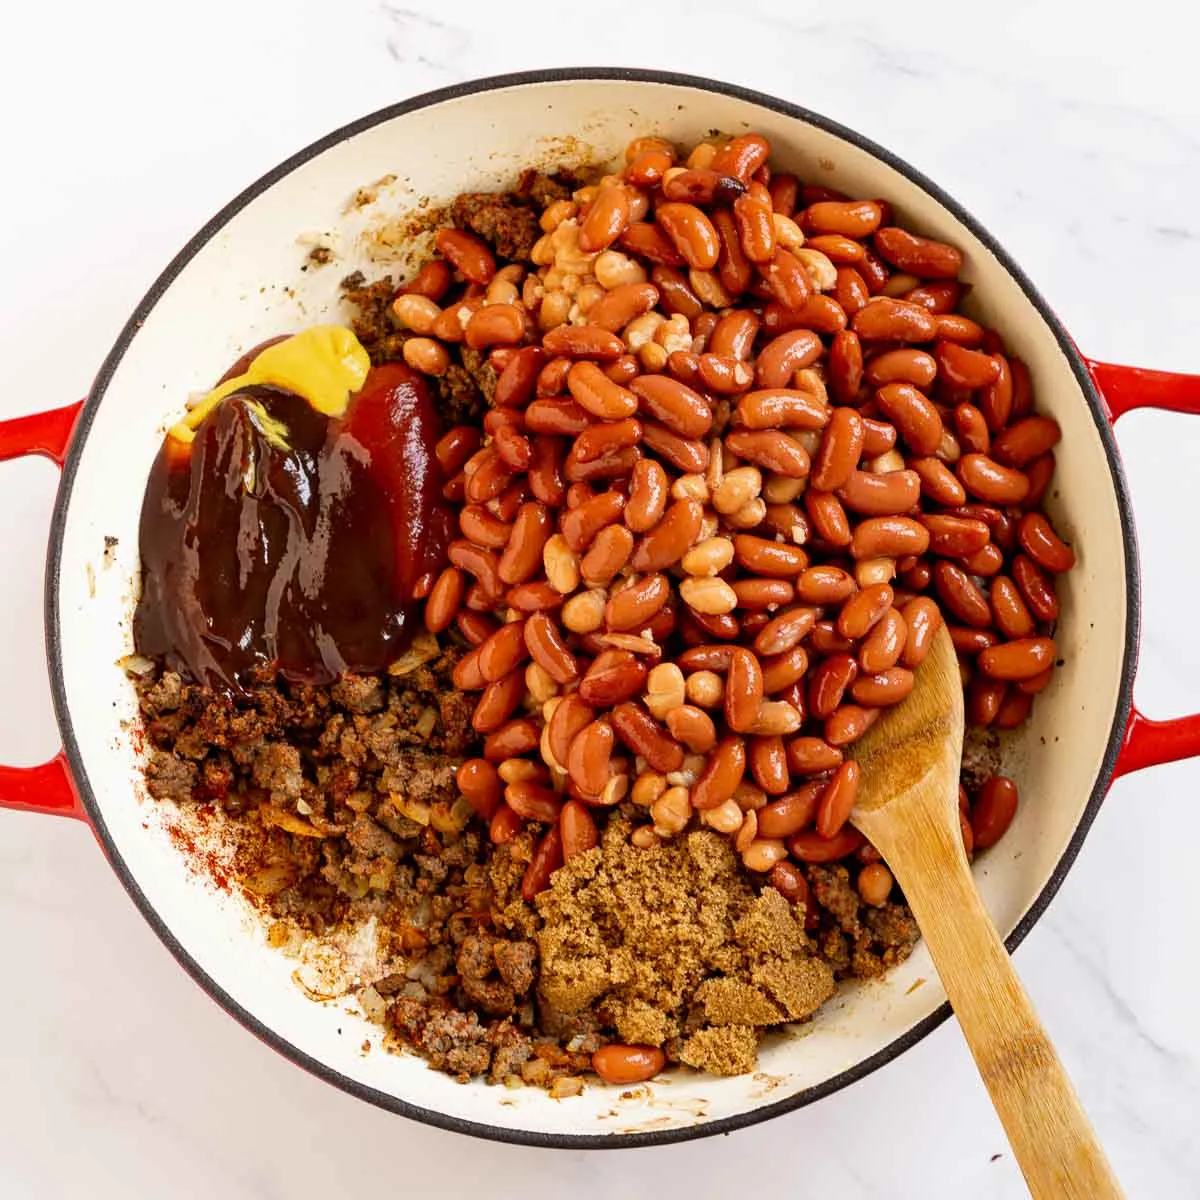 Beans, BBQ sauce, ketchup, and other ingredients added to a pan with ground beef.